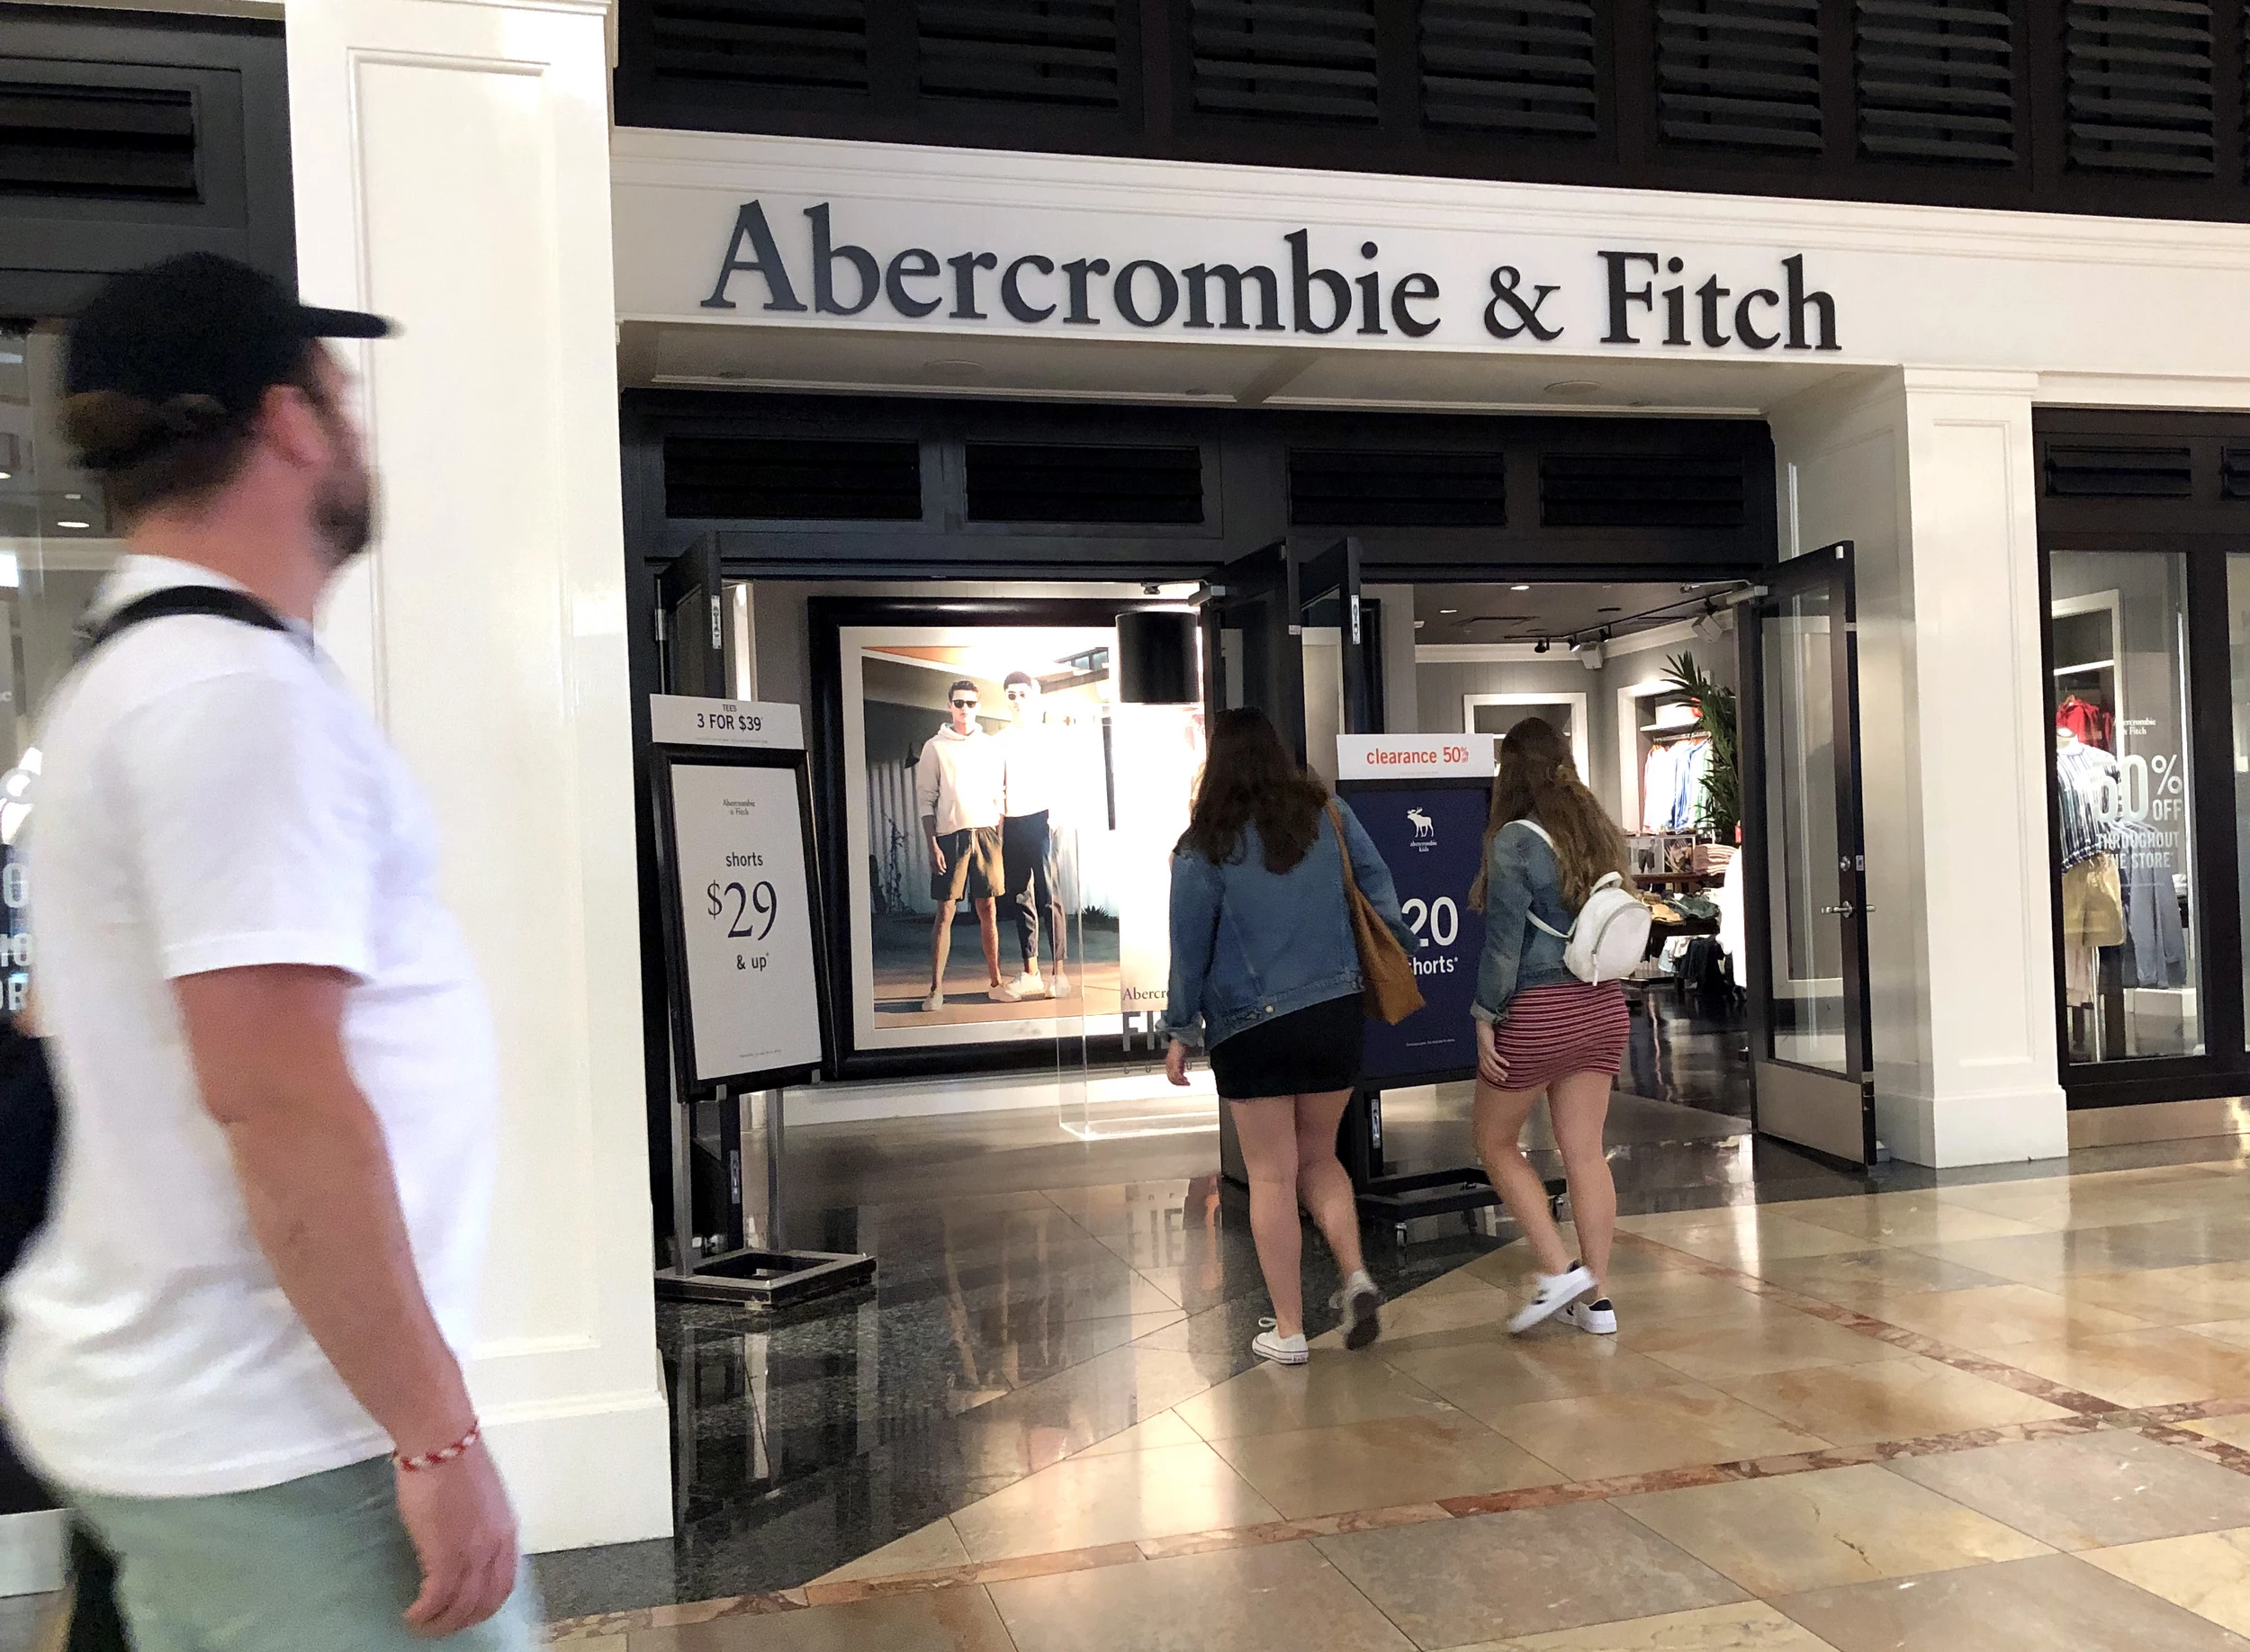 ambrie combie and fitch